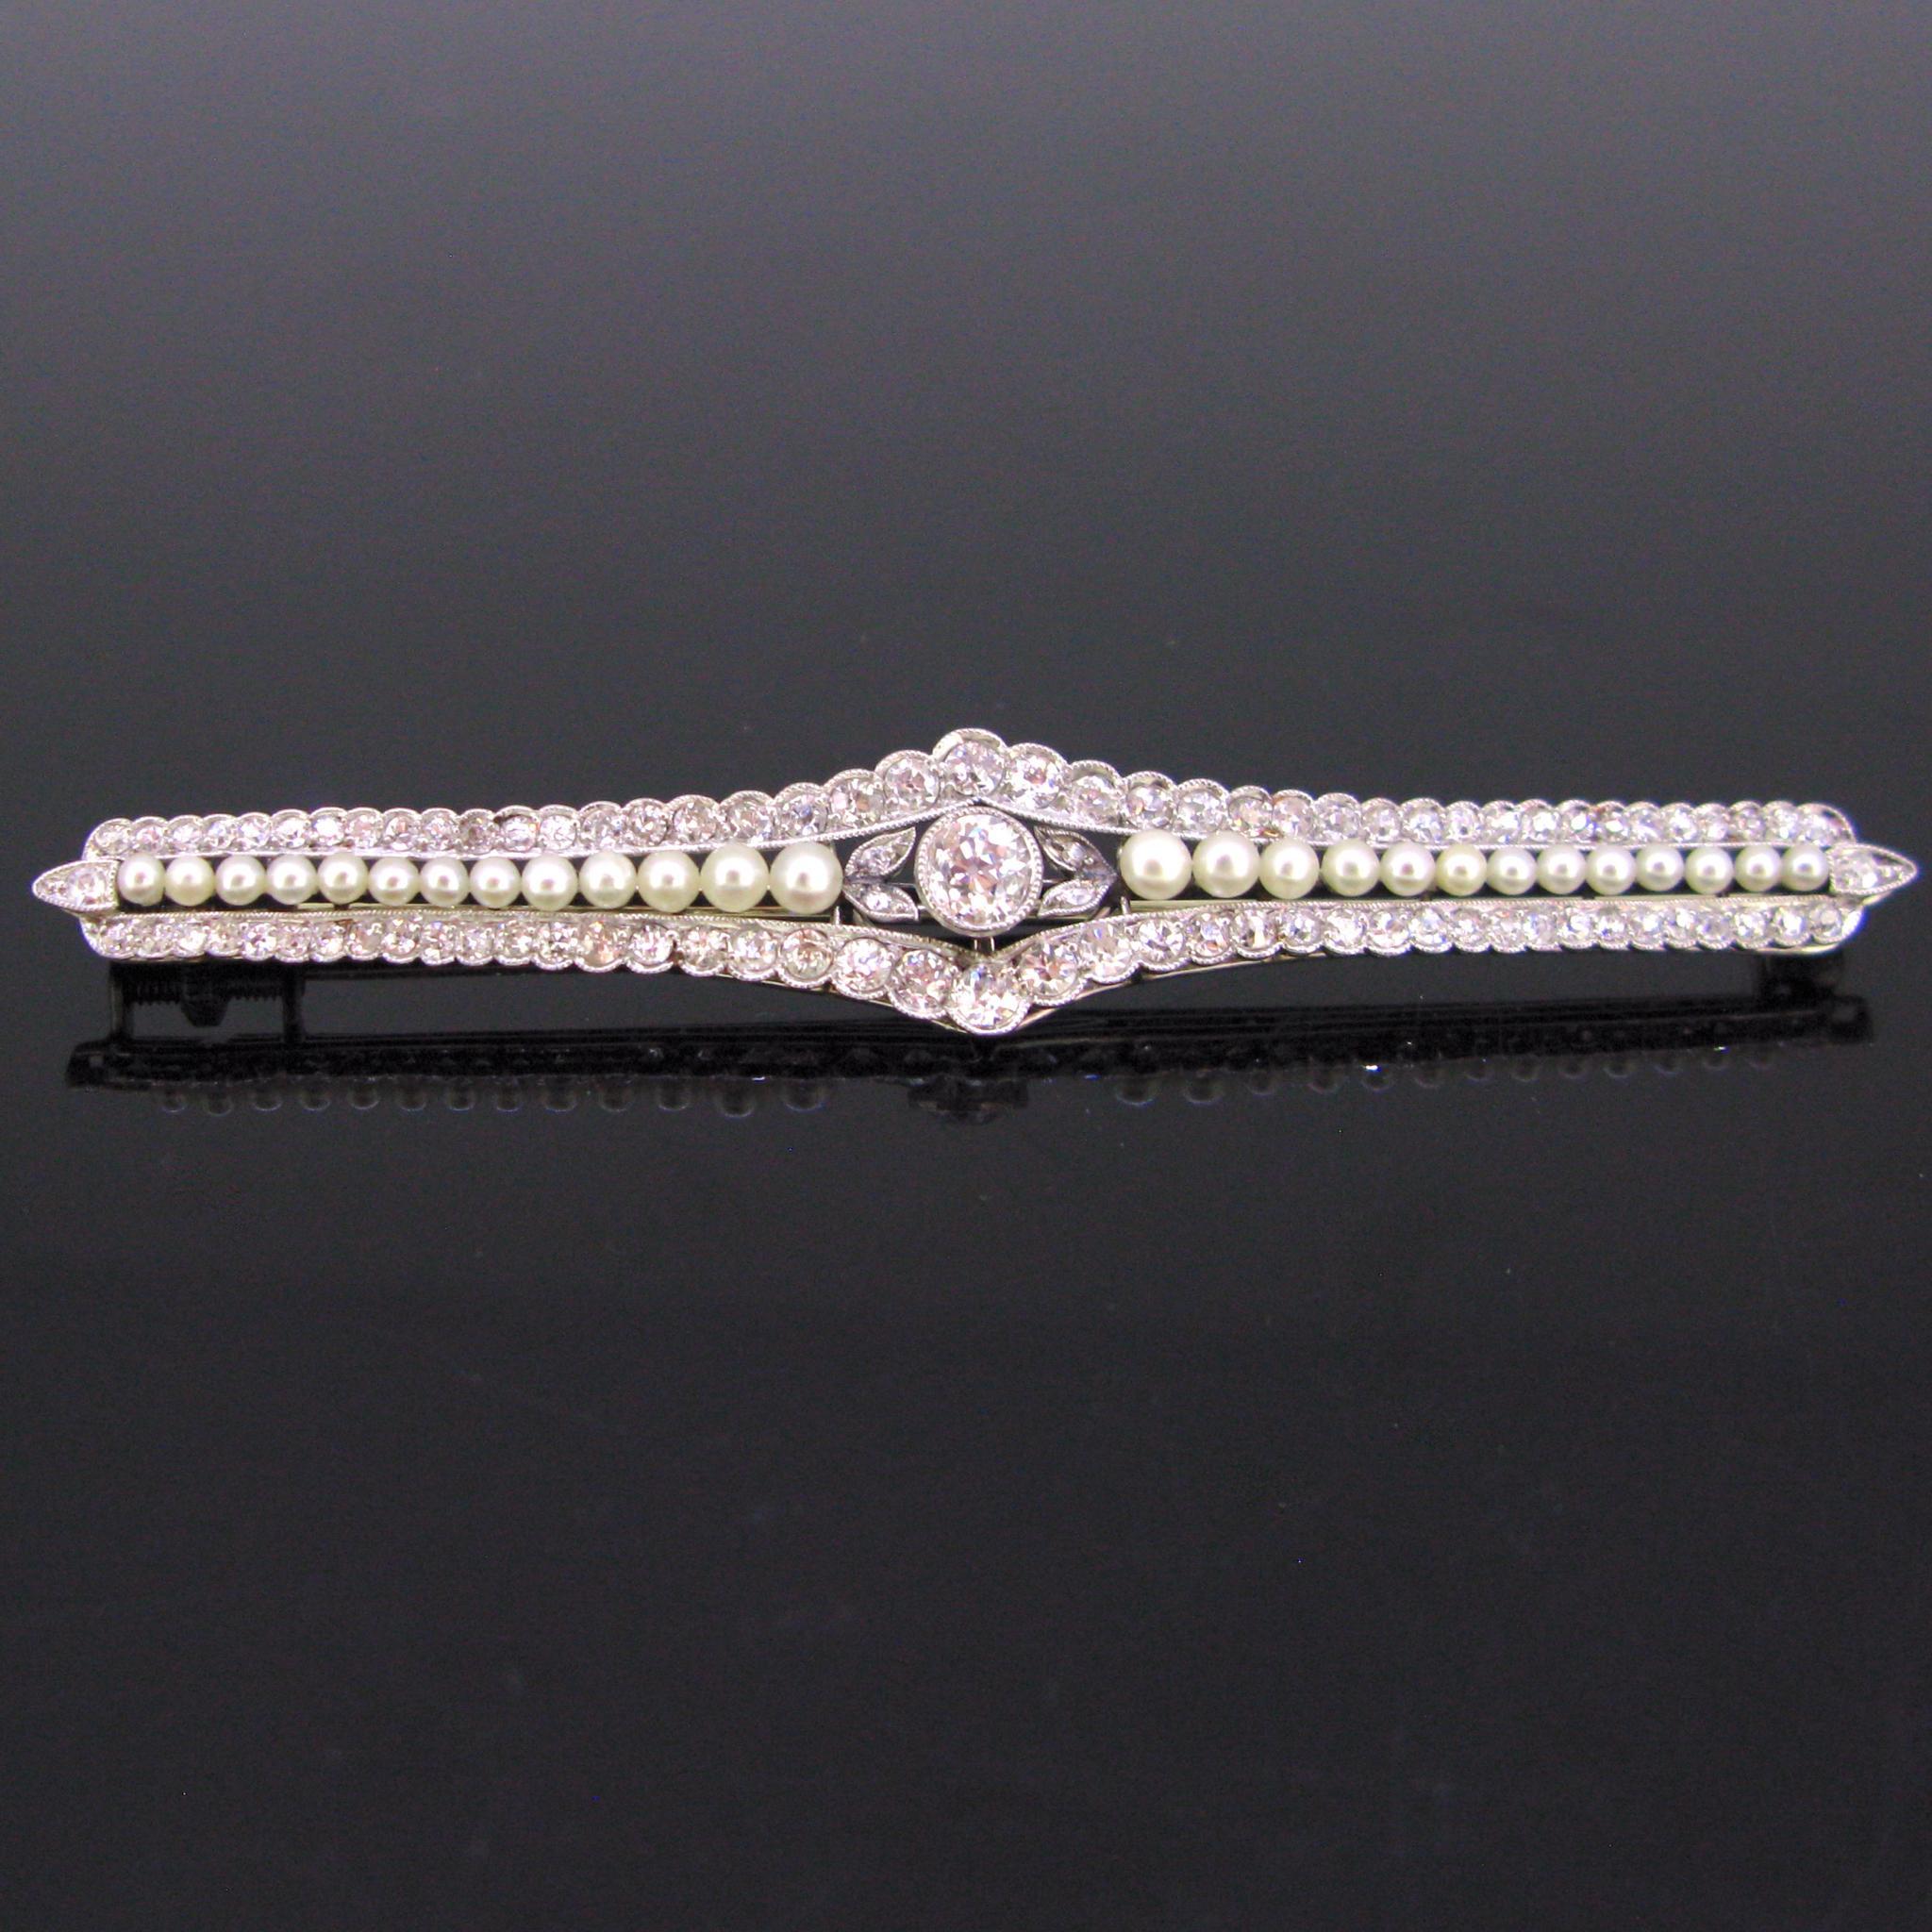 Old European Cut Antique Edwardian Diamonds and Pearls Brooch, 18kt Gold and Platinum, circa 1910